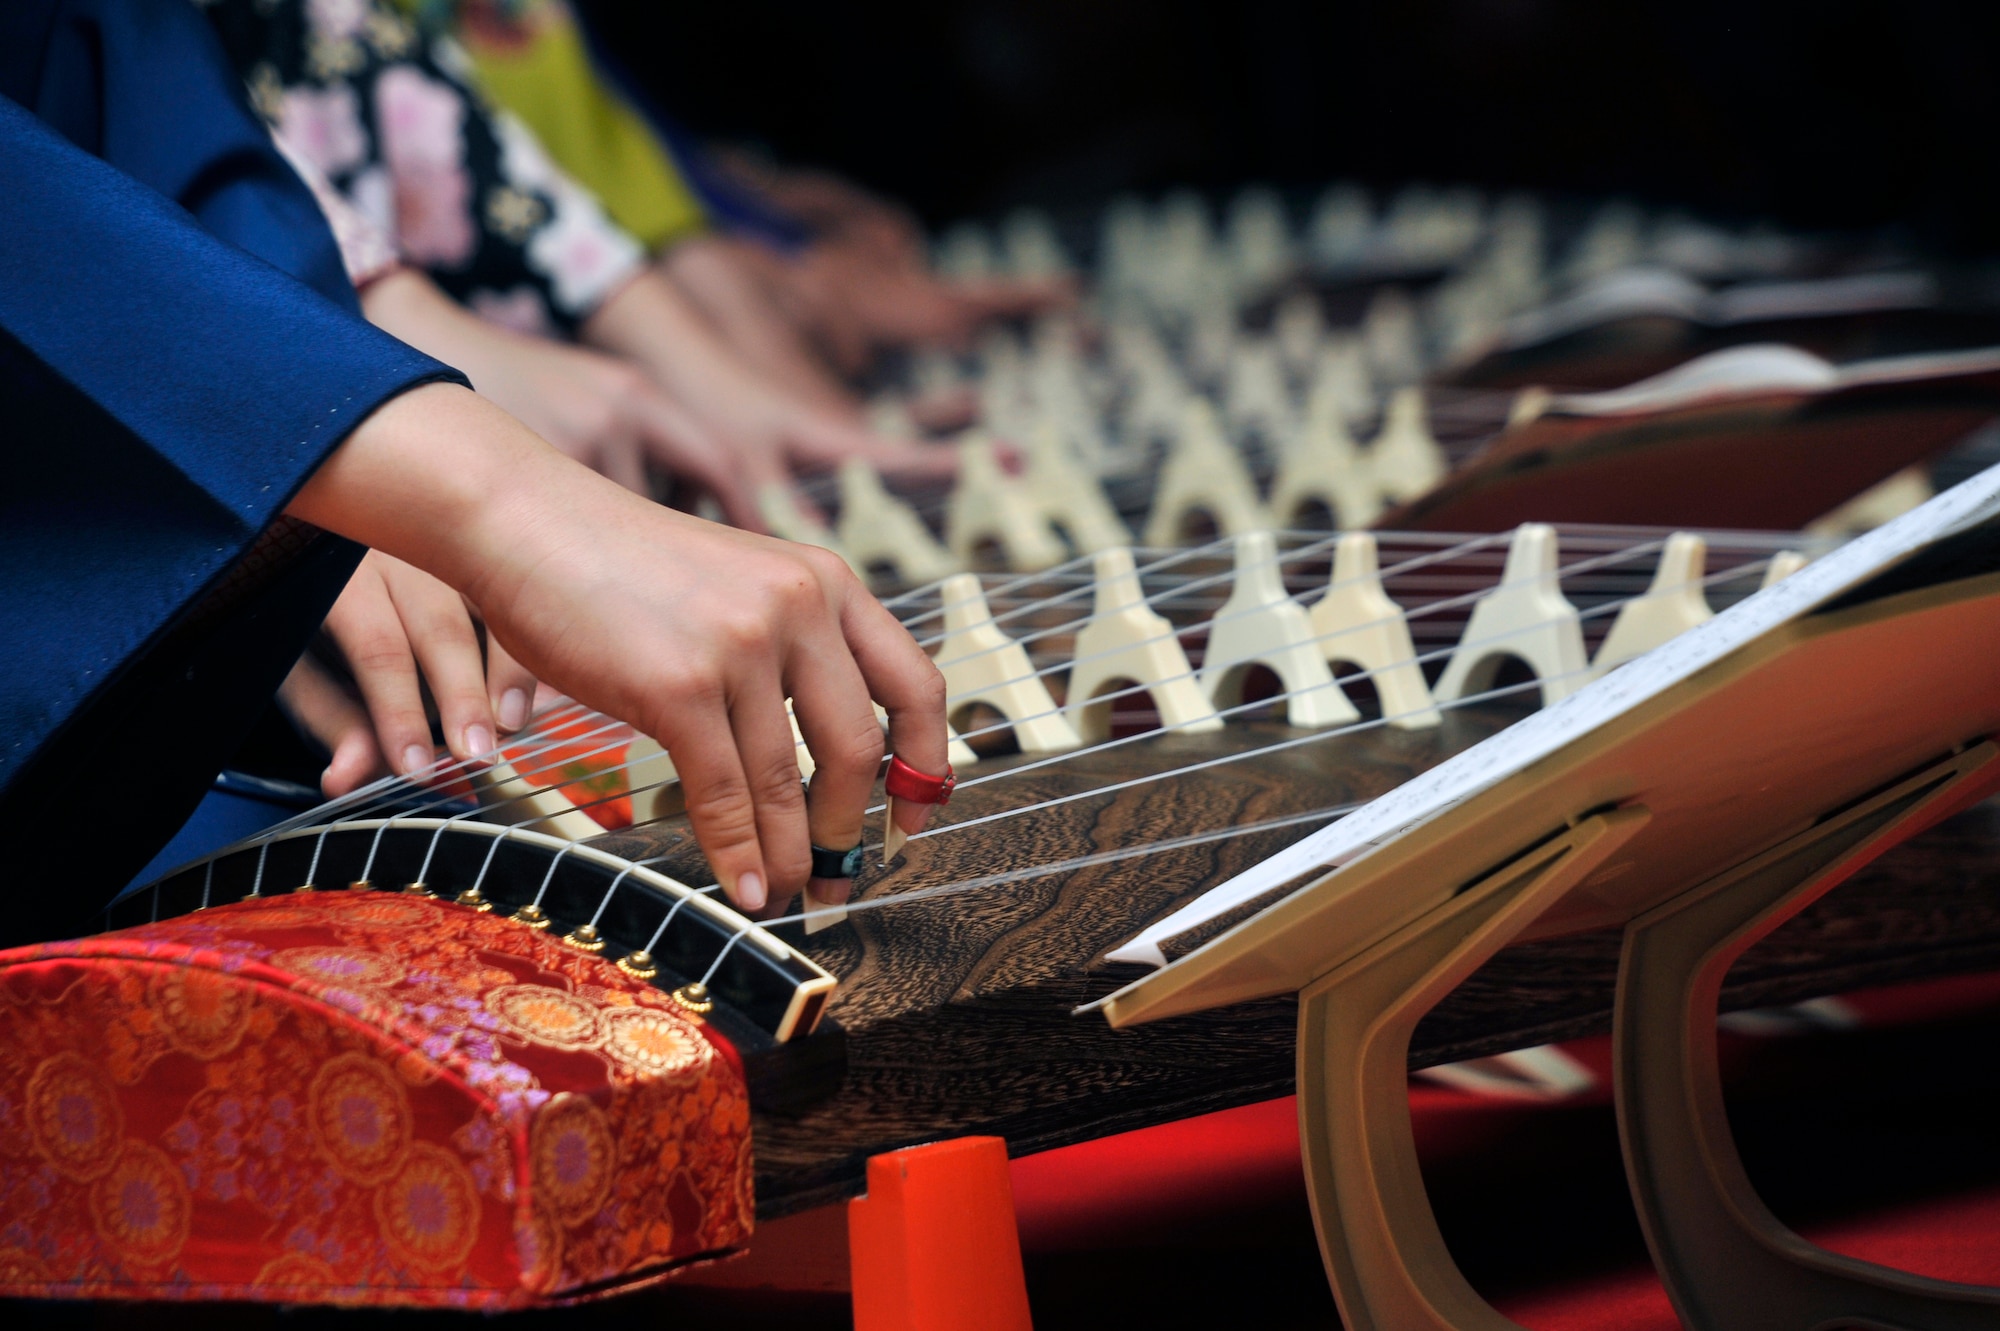 Musicians from the Yanada Shinko perform Koto music during the 26th Annual Japan Day at Misawa Air Base, Japan, April 6, 2013. The Koto is the national instrument of Japan that has 13 strings, which are strung over 13 movable bridges along the width of the instrument.  (U.S. Air Force photo by Airman 1st Class Zachary Kee)